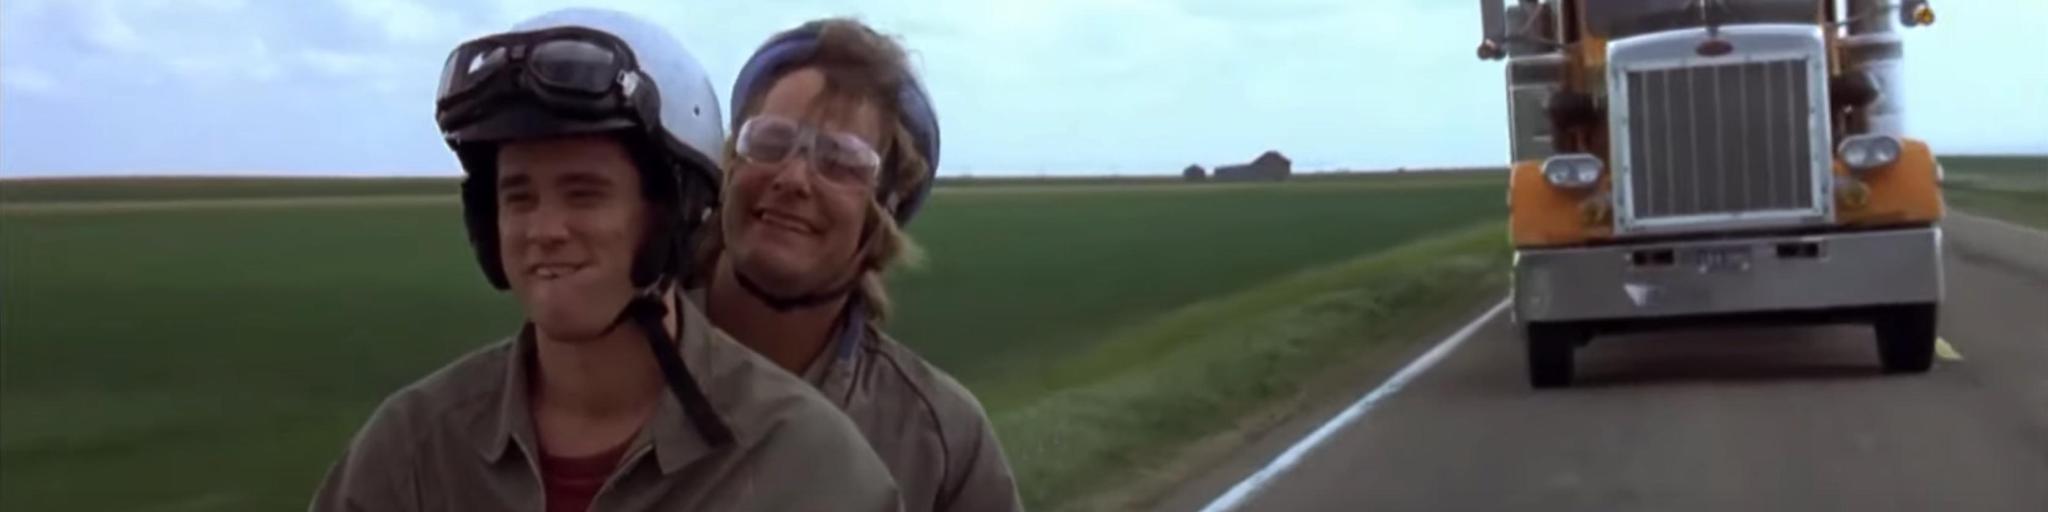 Still image from the Dumb and Dumber movie, showing the duo riding the famous bike with a truck approaching behind them